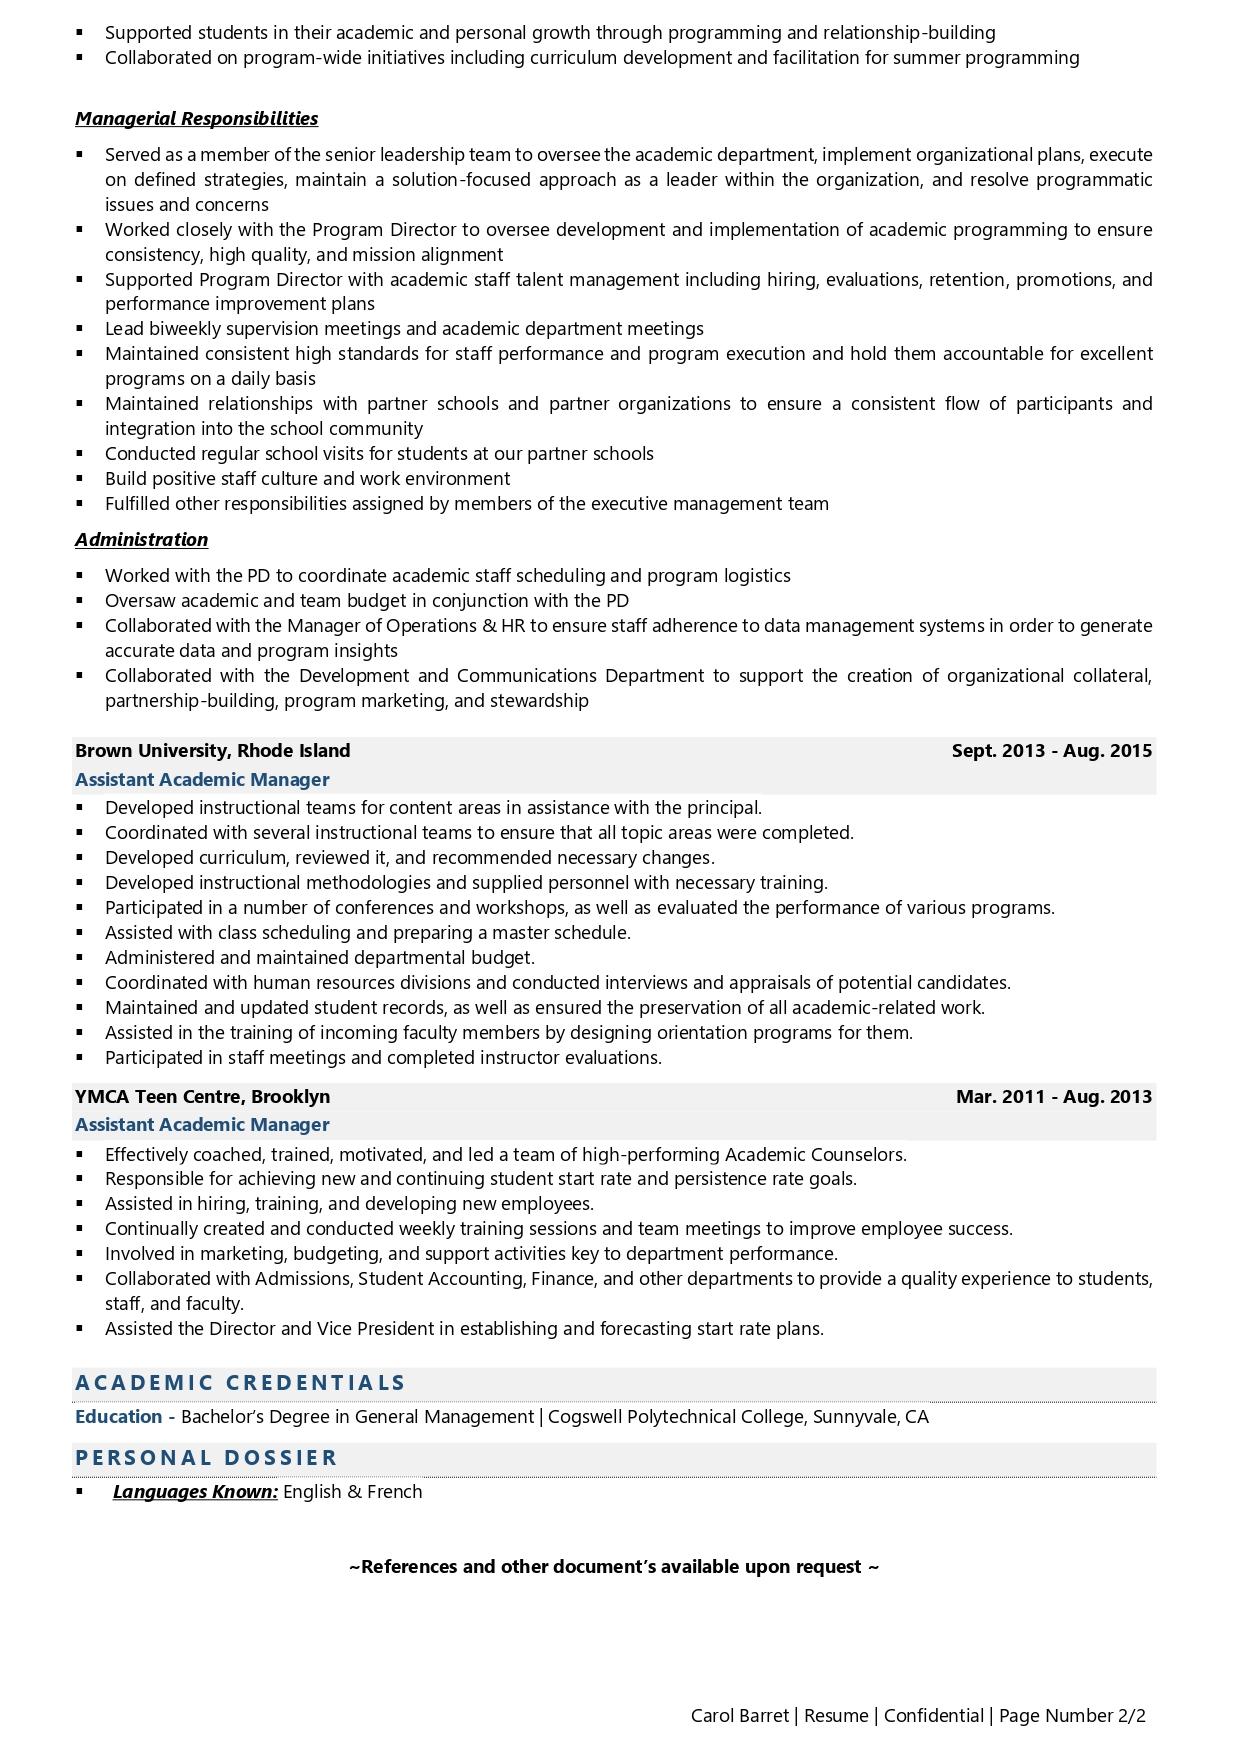 Academic Manager - Resume Example & Template